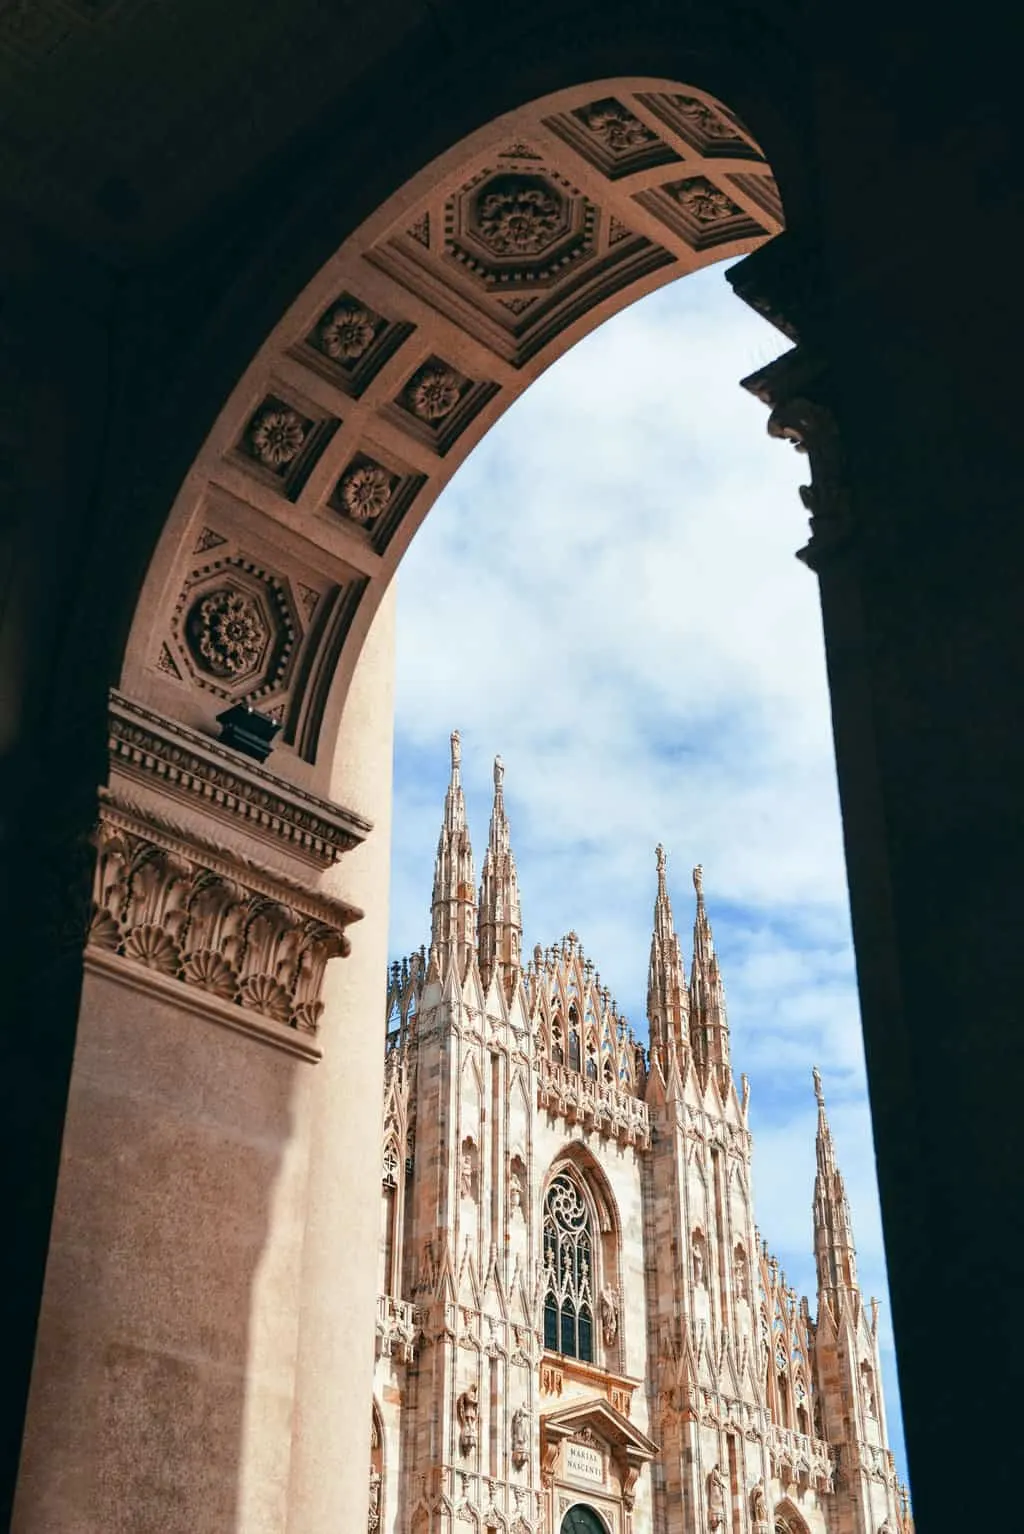 Milan Cathedral viewed through archway in Italy.